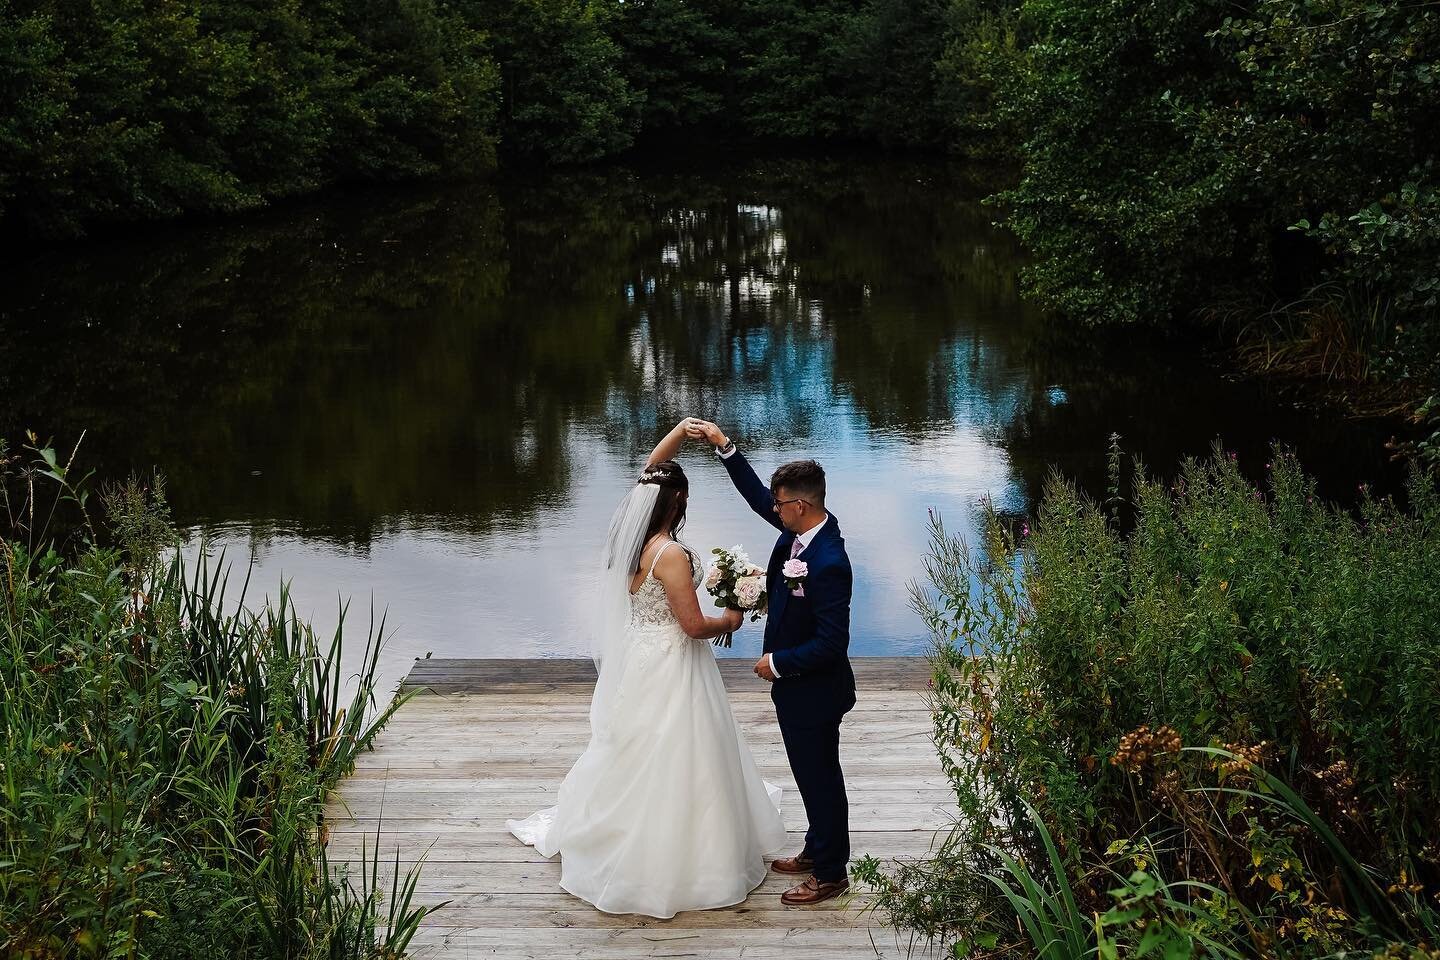 There&rsquo;s something about being by the water that makes my heart so full! As tempted as me and @strawberryweddingvideo were to have a dip we didn&rsquo;t&hellip; sorry for balancing on the edge to wind you up Bethan @styallodge 

With the amazing